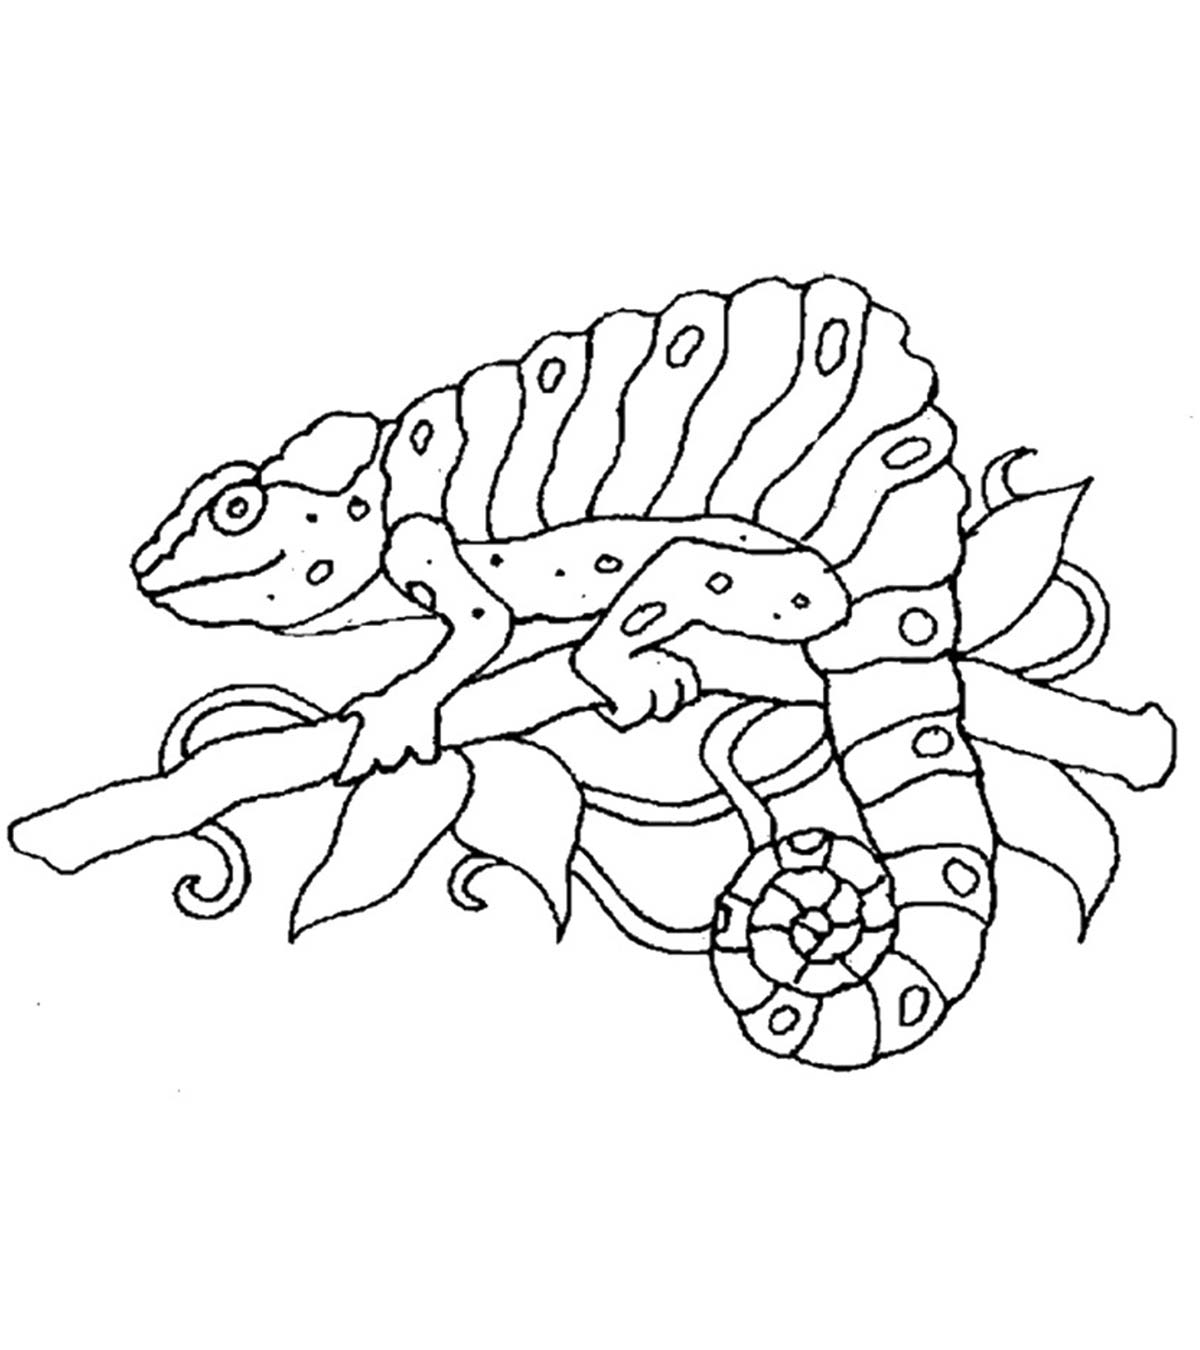 10 Best Chameleon Coloring Pages For Your Toddler